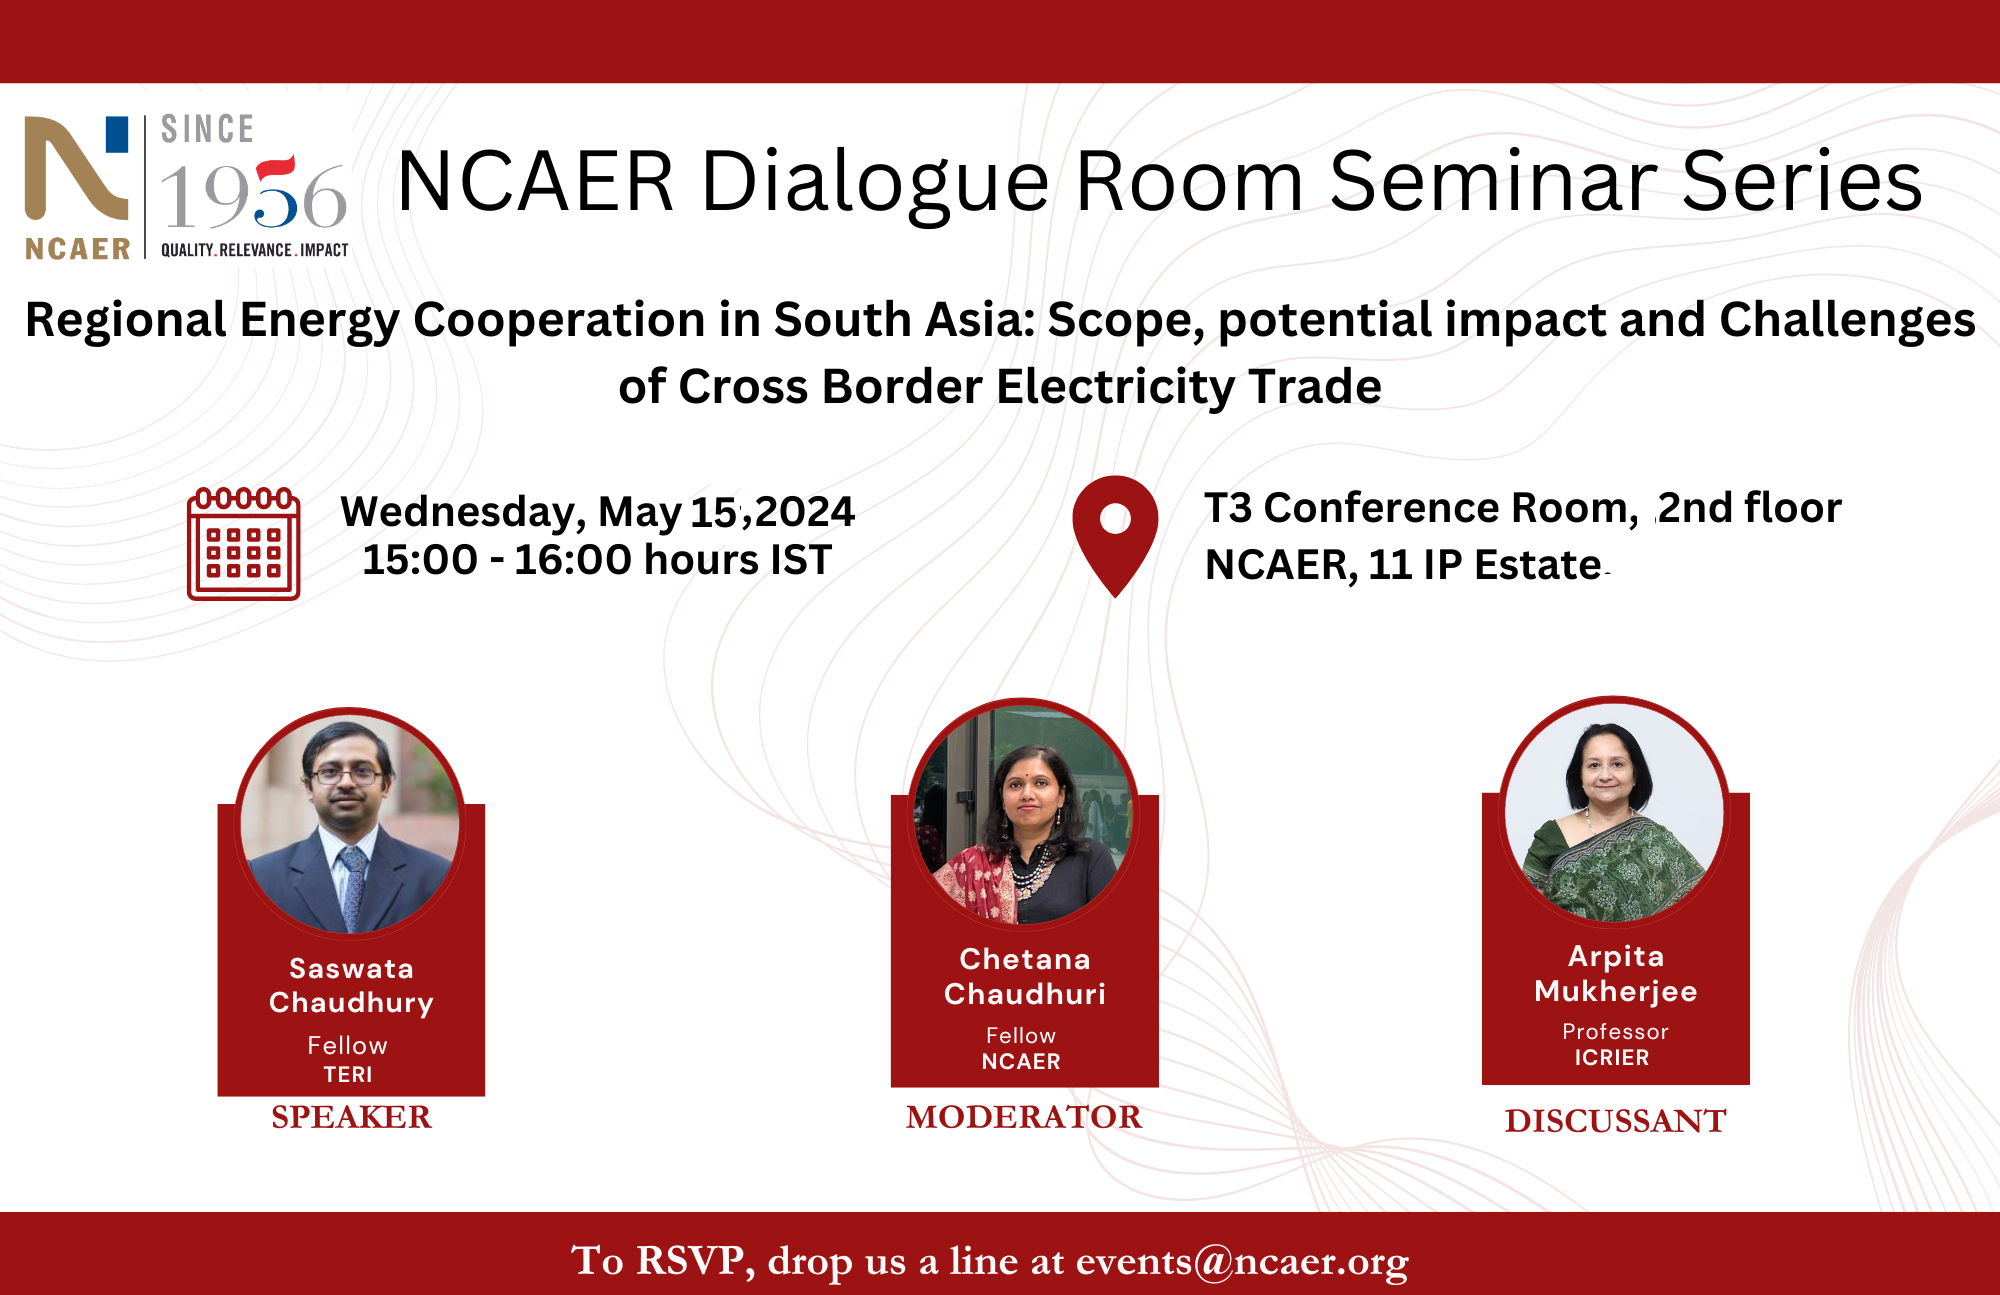 Regional Energy Cooperation in South Asia: Scope, potential impact and Challenges of Cross Border Electricity Trade